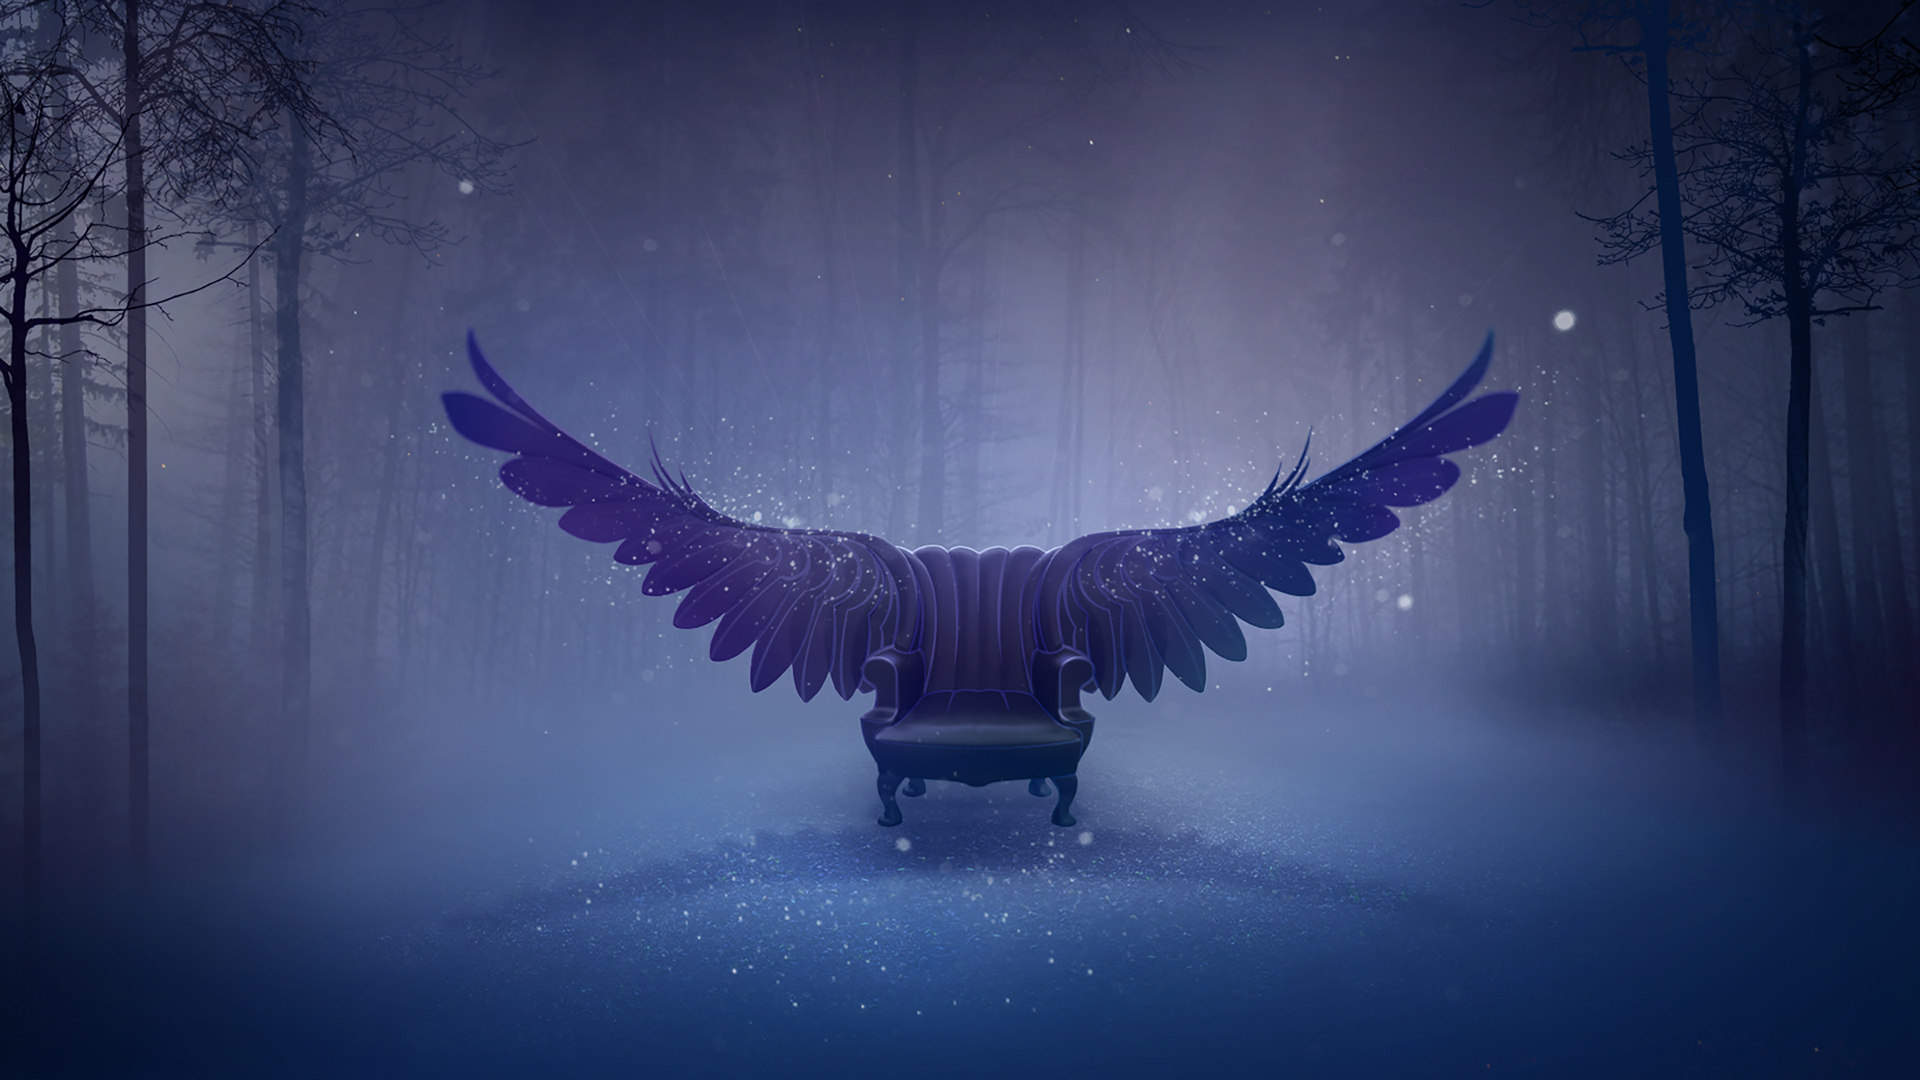 Styleframe: Chair with wings in a forest glade